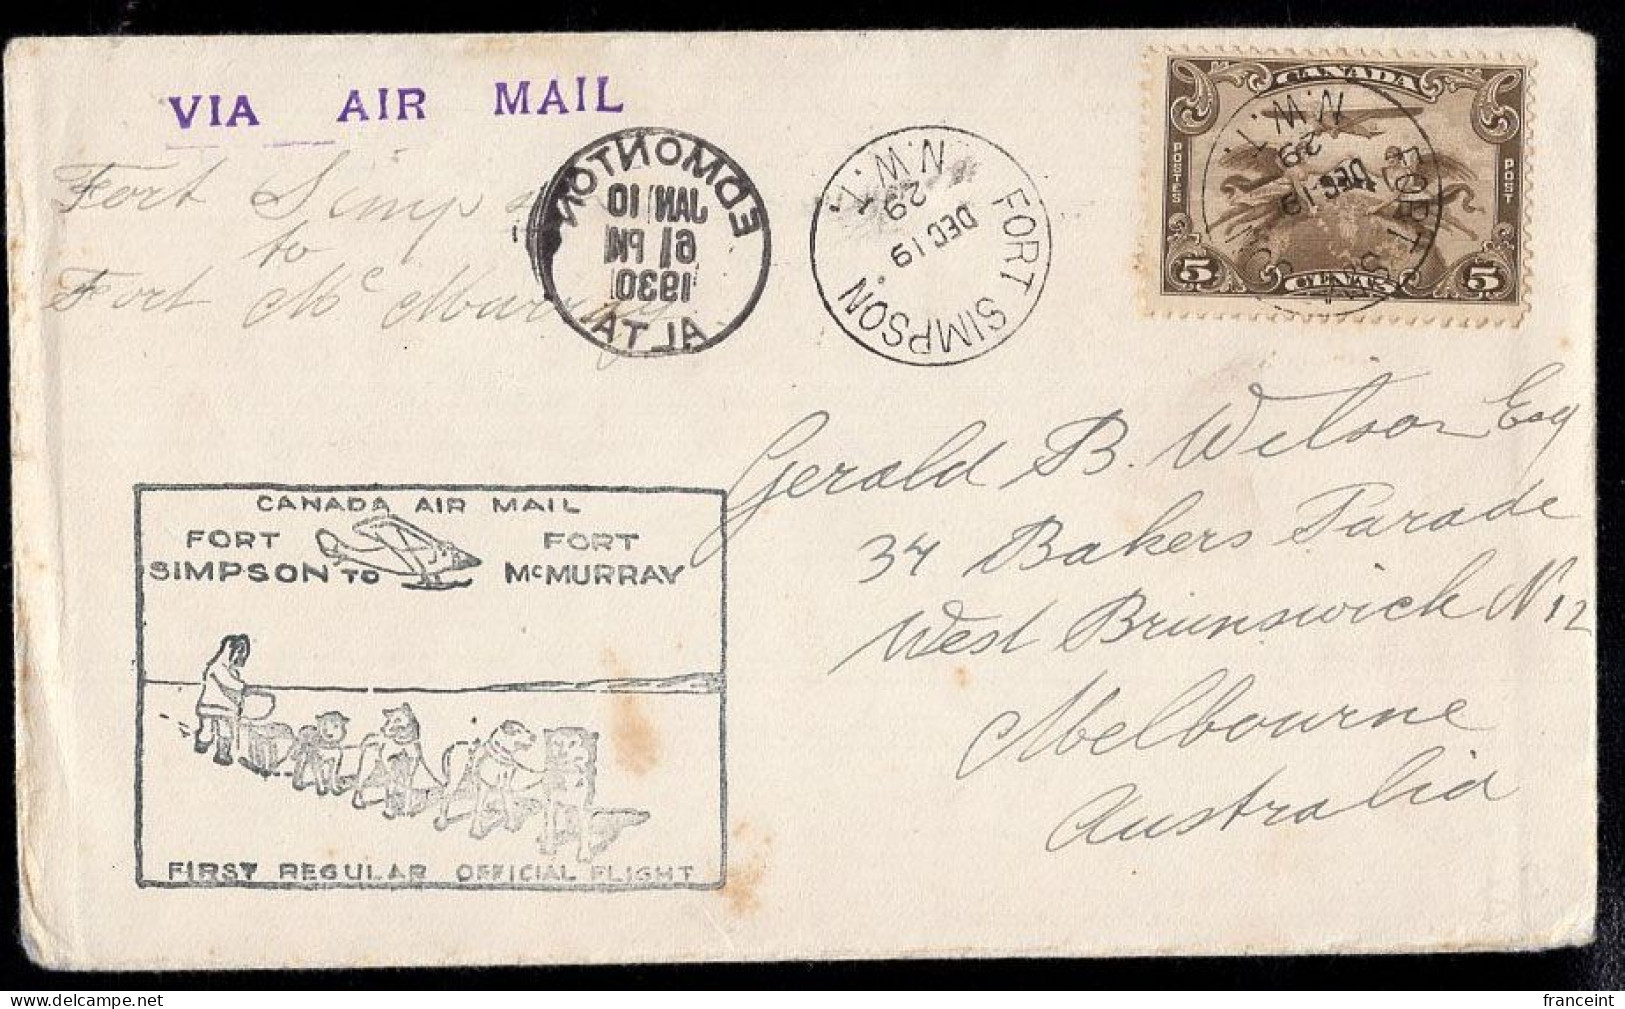 CANADA(1929) Dogsled Team. Mail Plane. First Flight Cover Fort Simpson To Fort McMurray With Delightful Cachet, Franked - Primi Voli